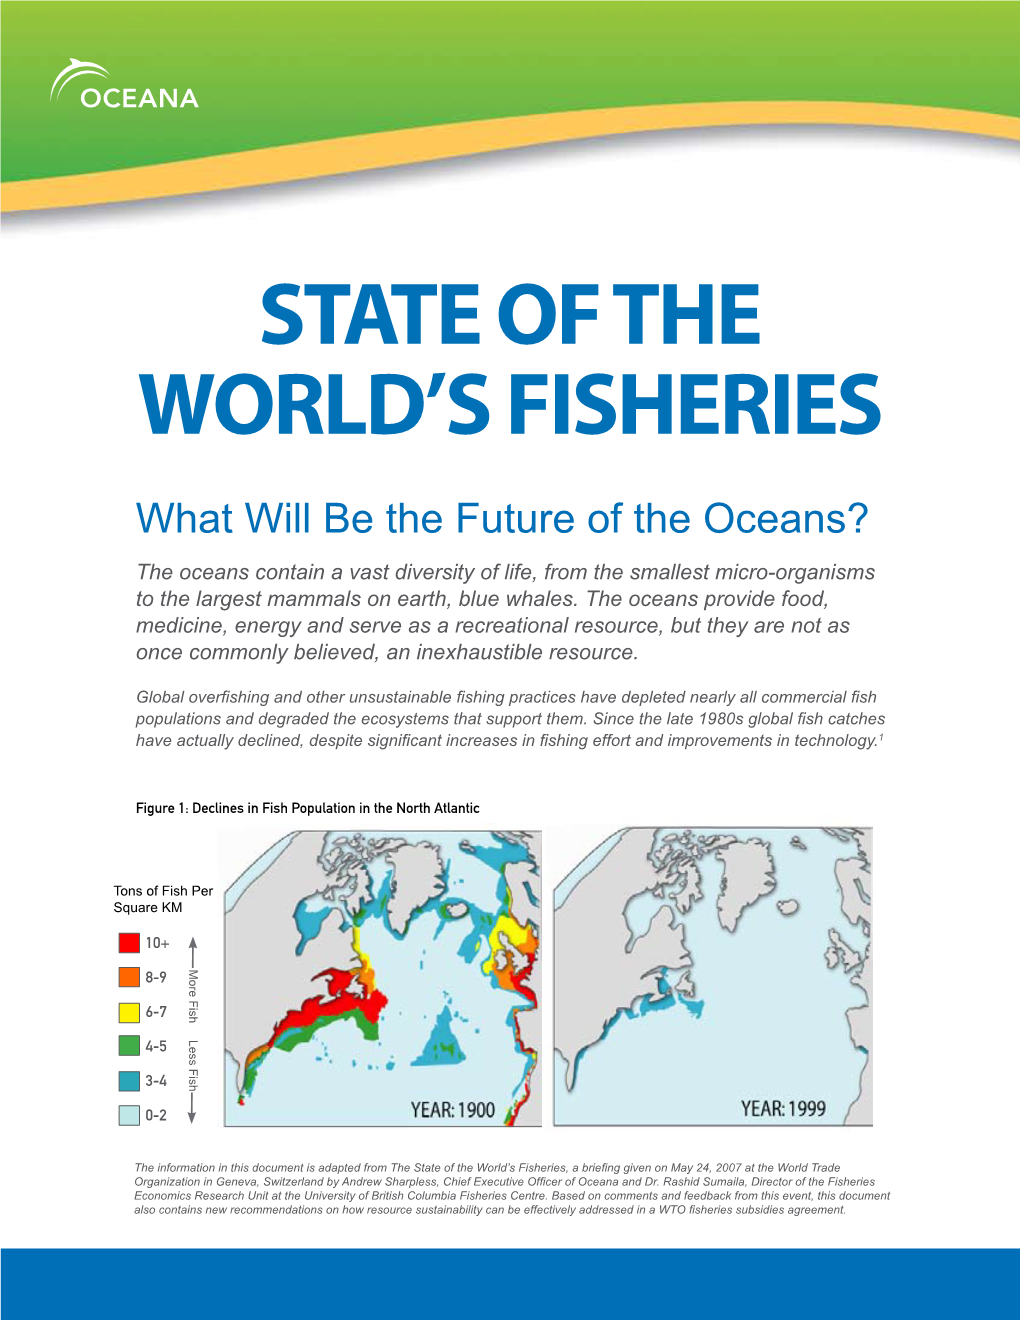 State of the World's Fisheries